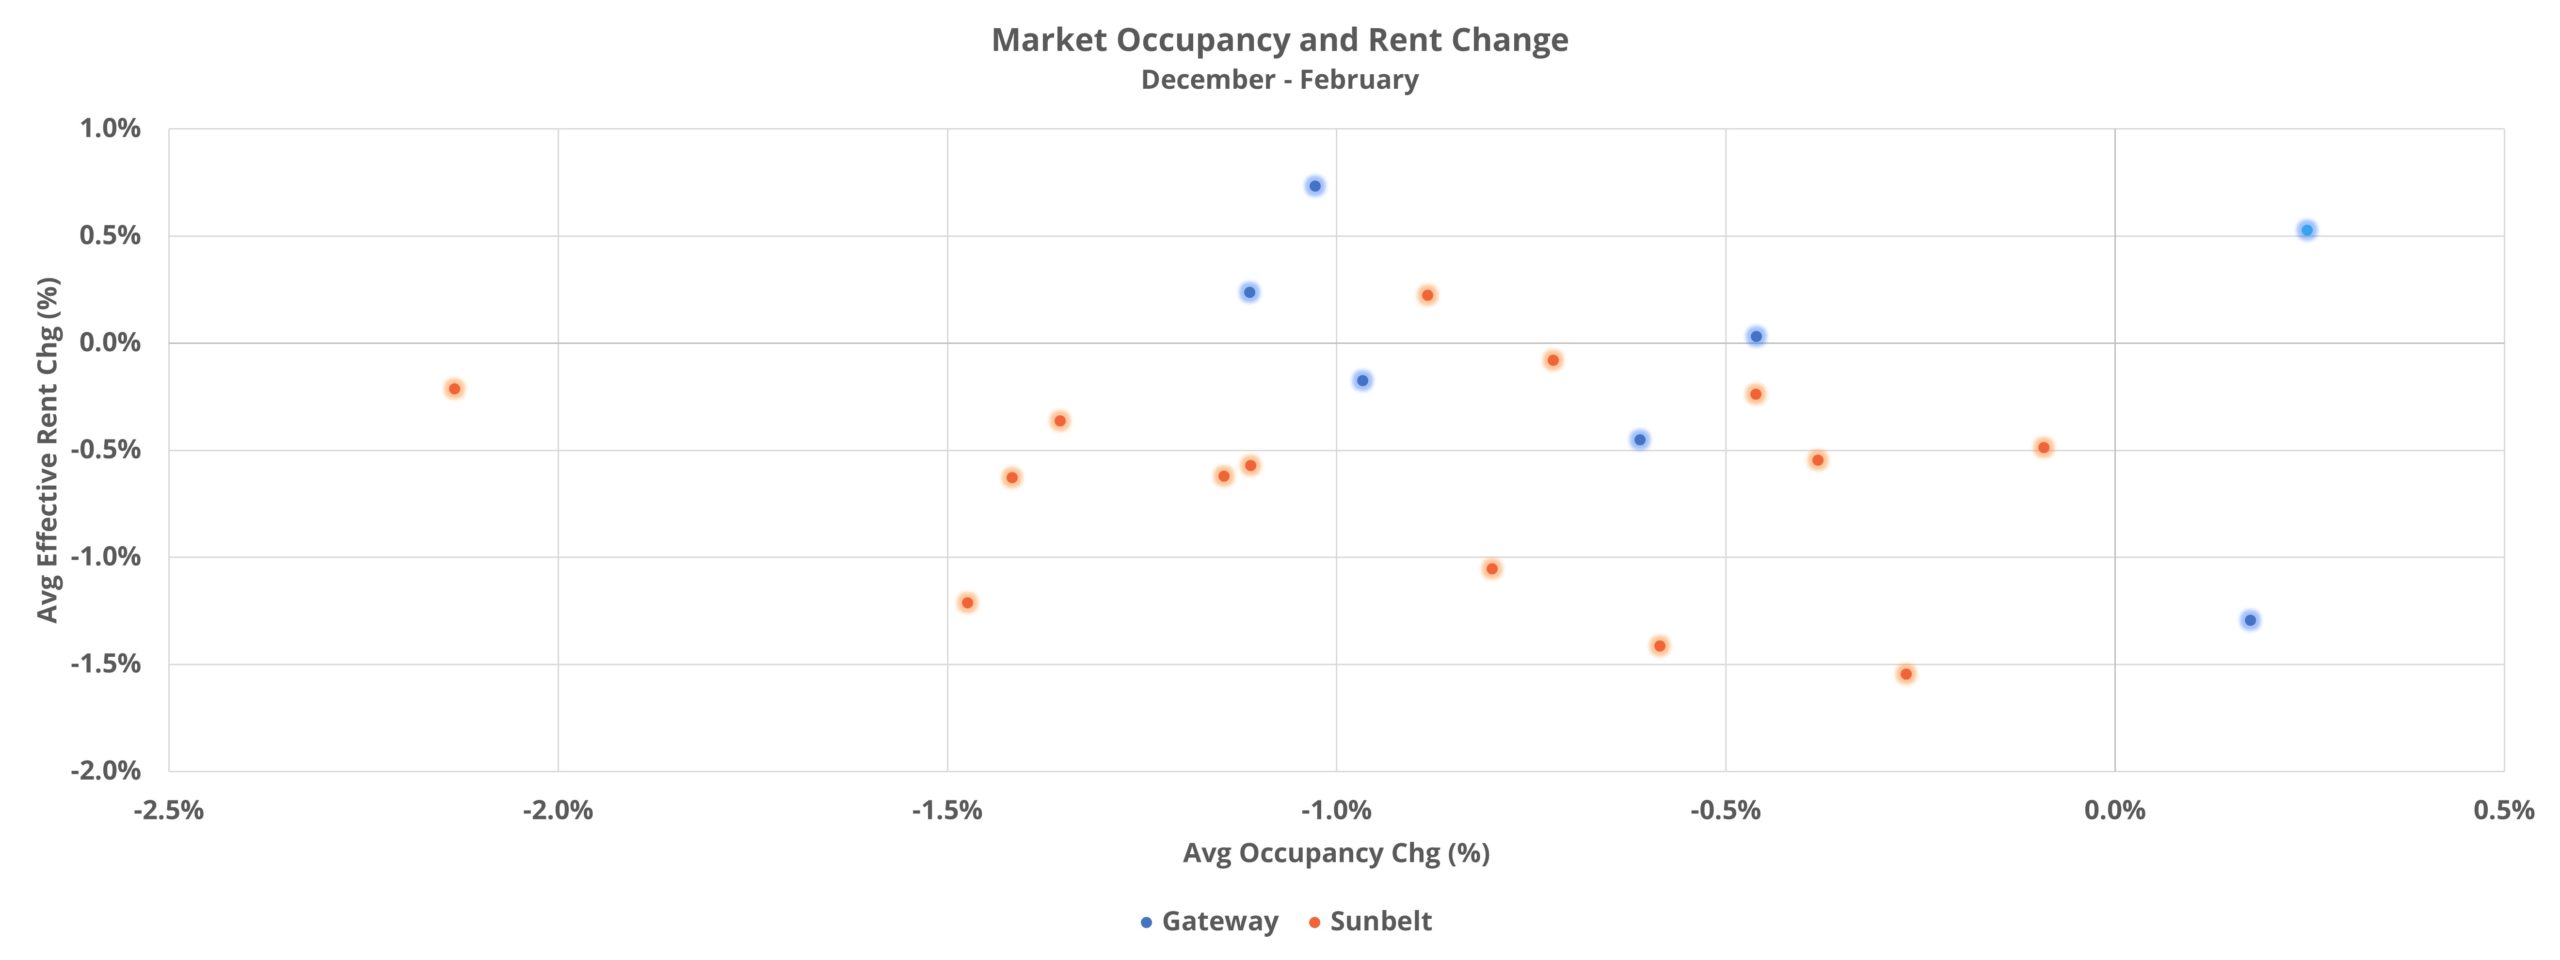 Market Occupancy and Rent Change